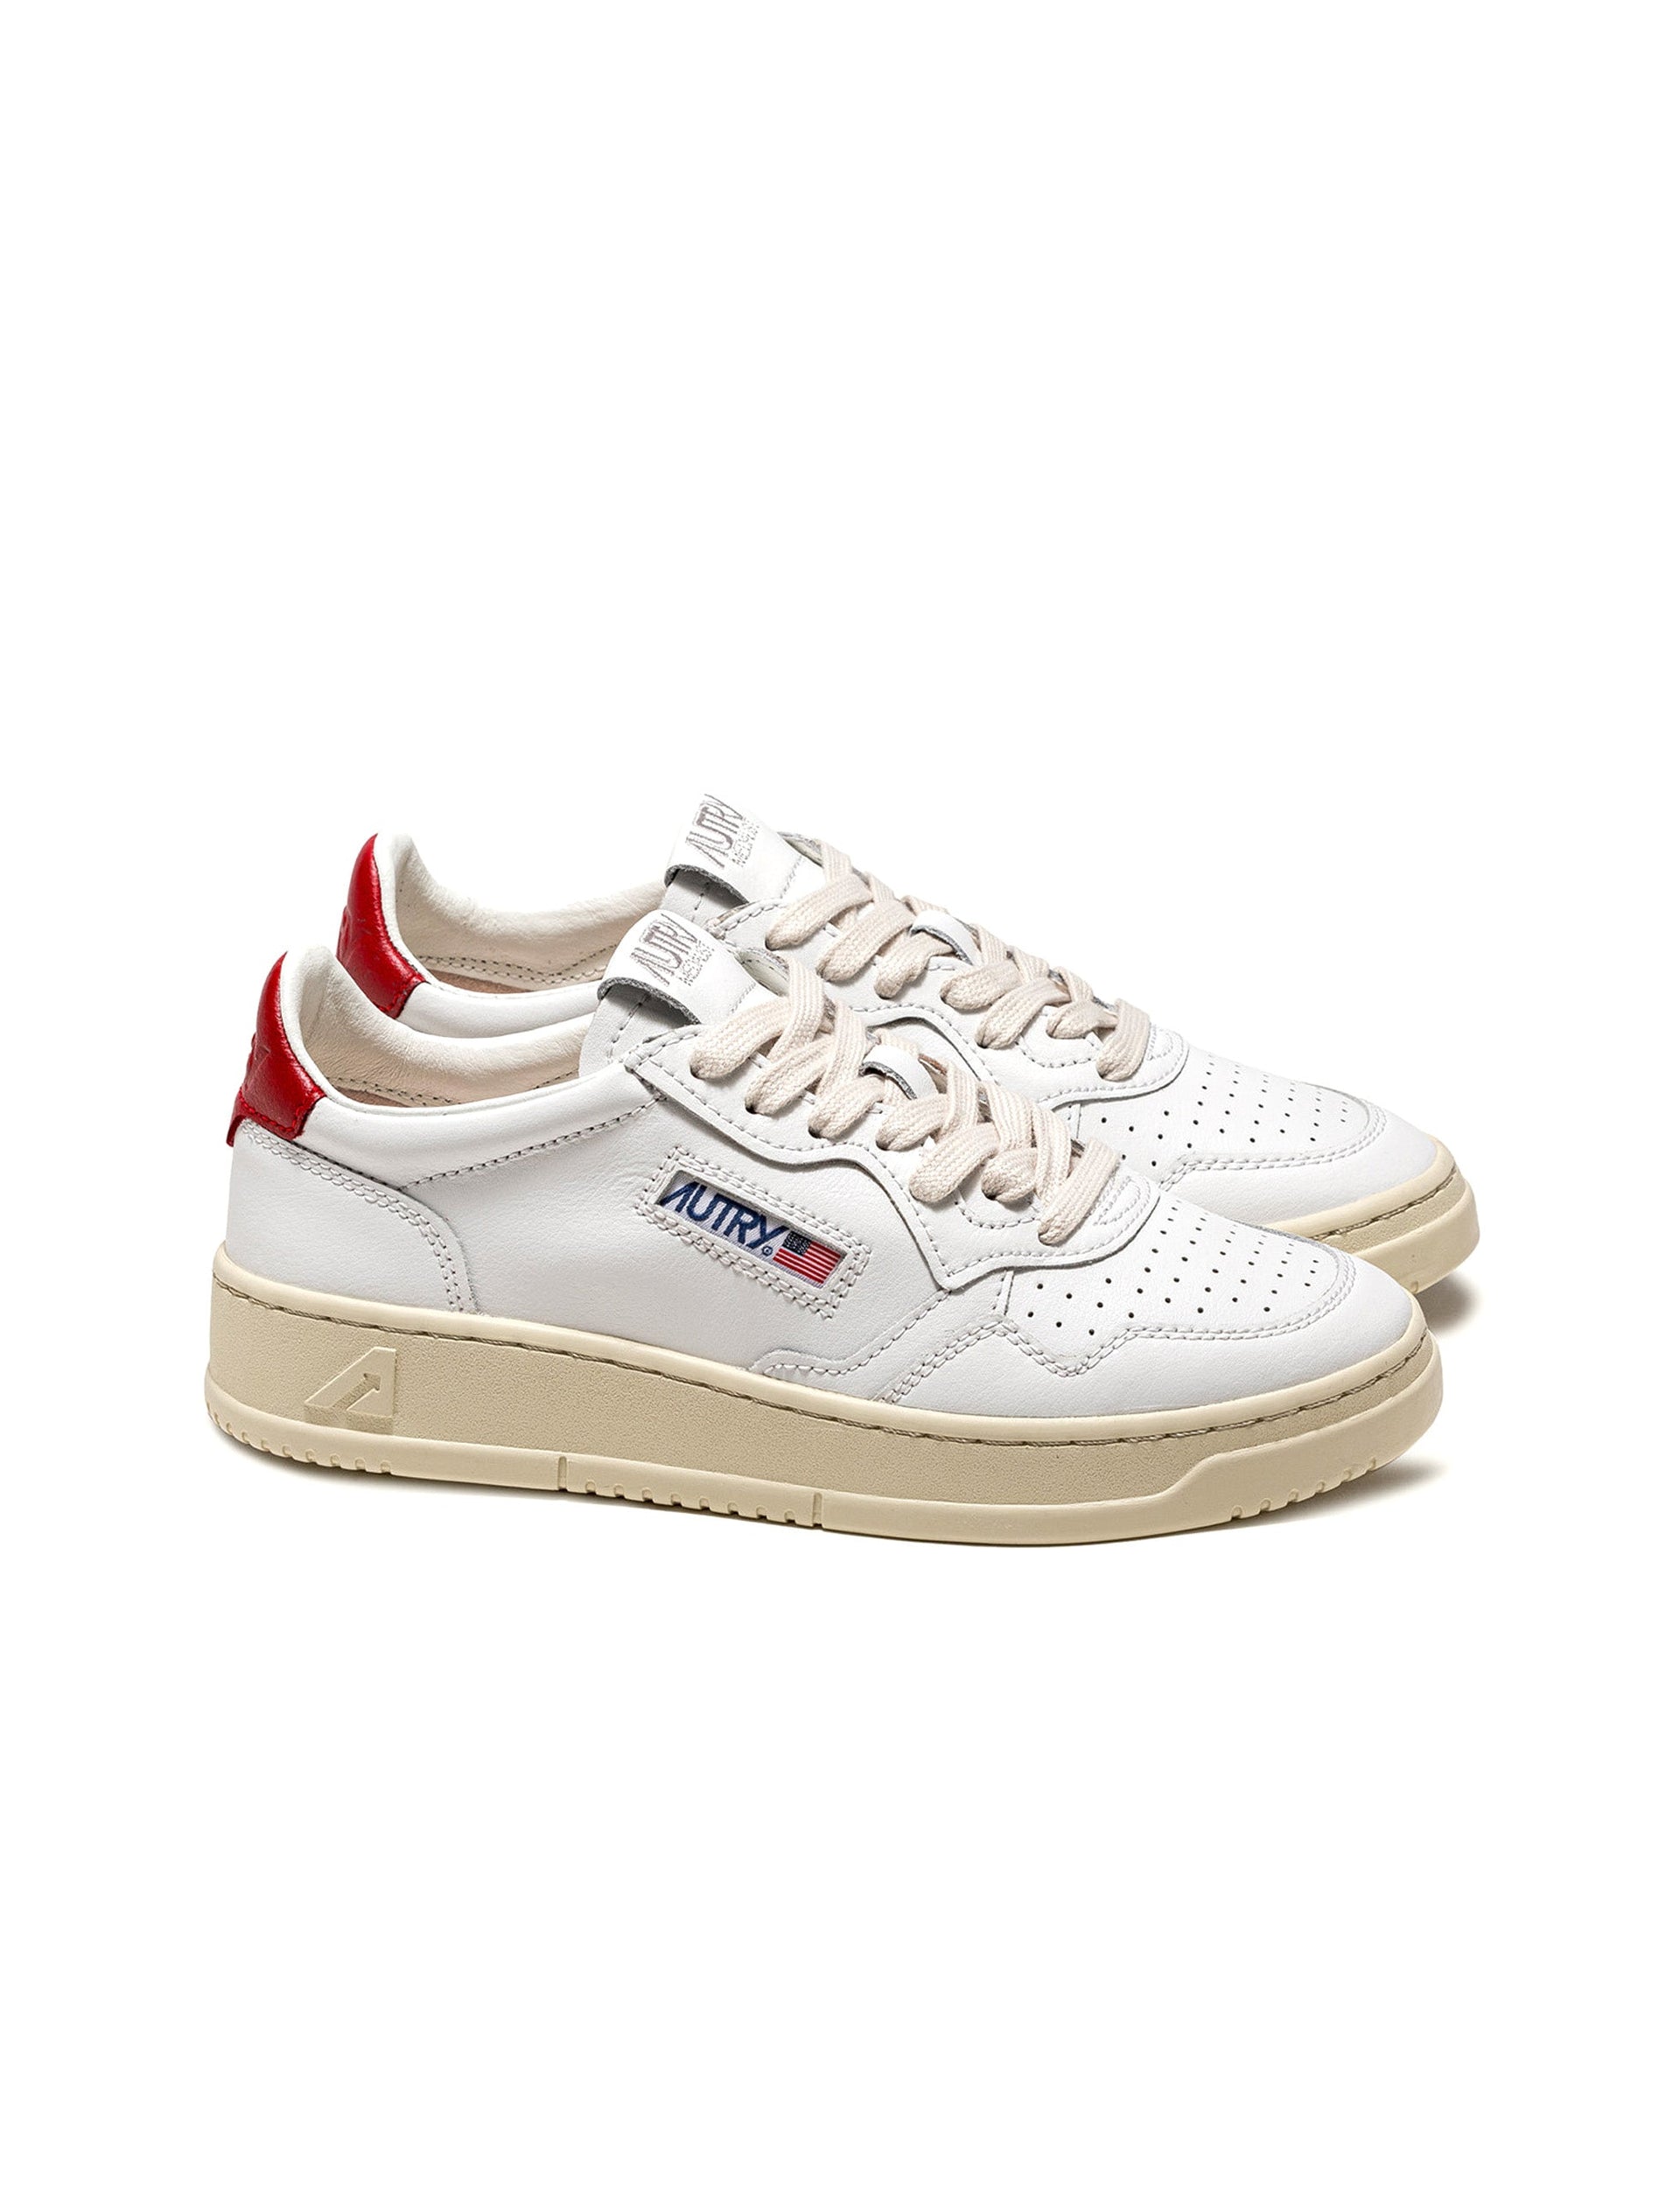 AUTRY SNEAKERS WOMAN MEDALIST LOW SNEAKERS IN LEATHER COLOR WHITE RED